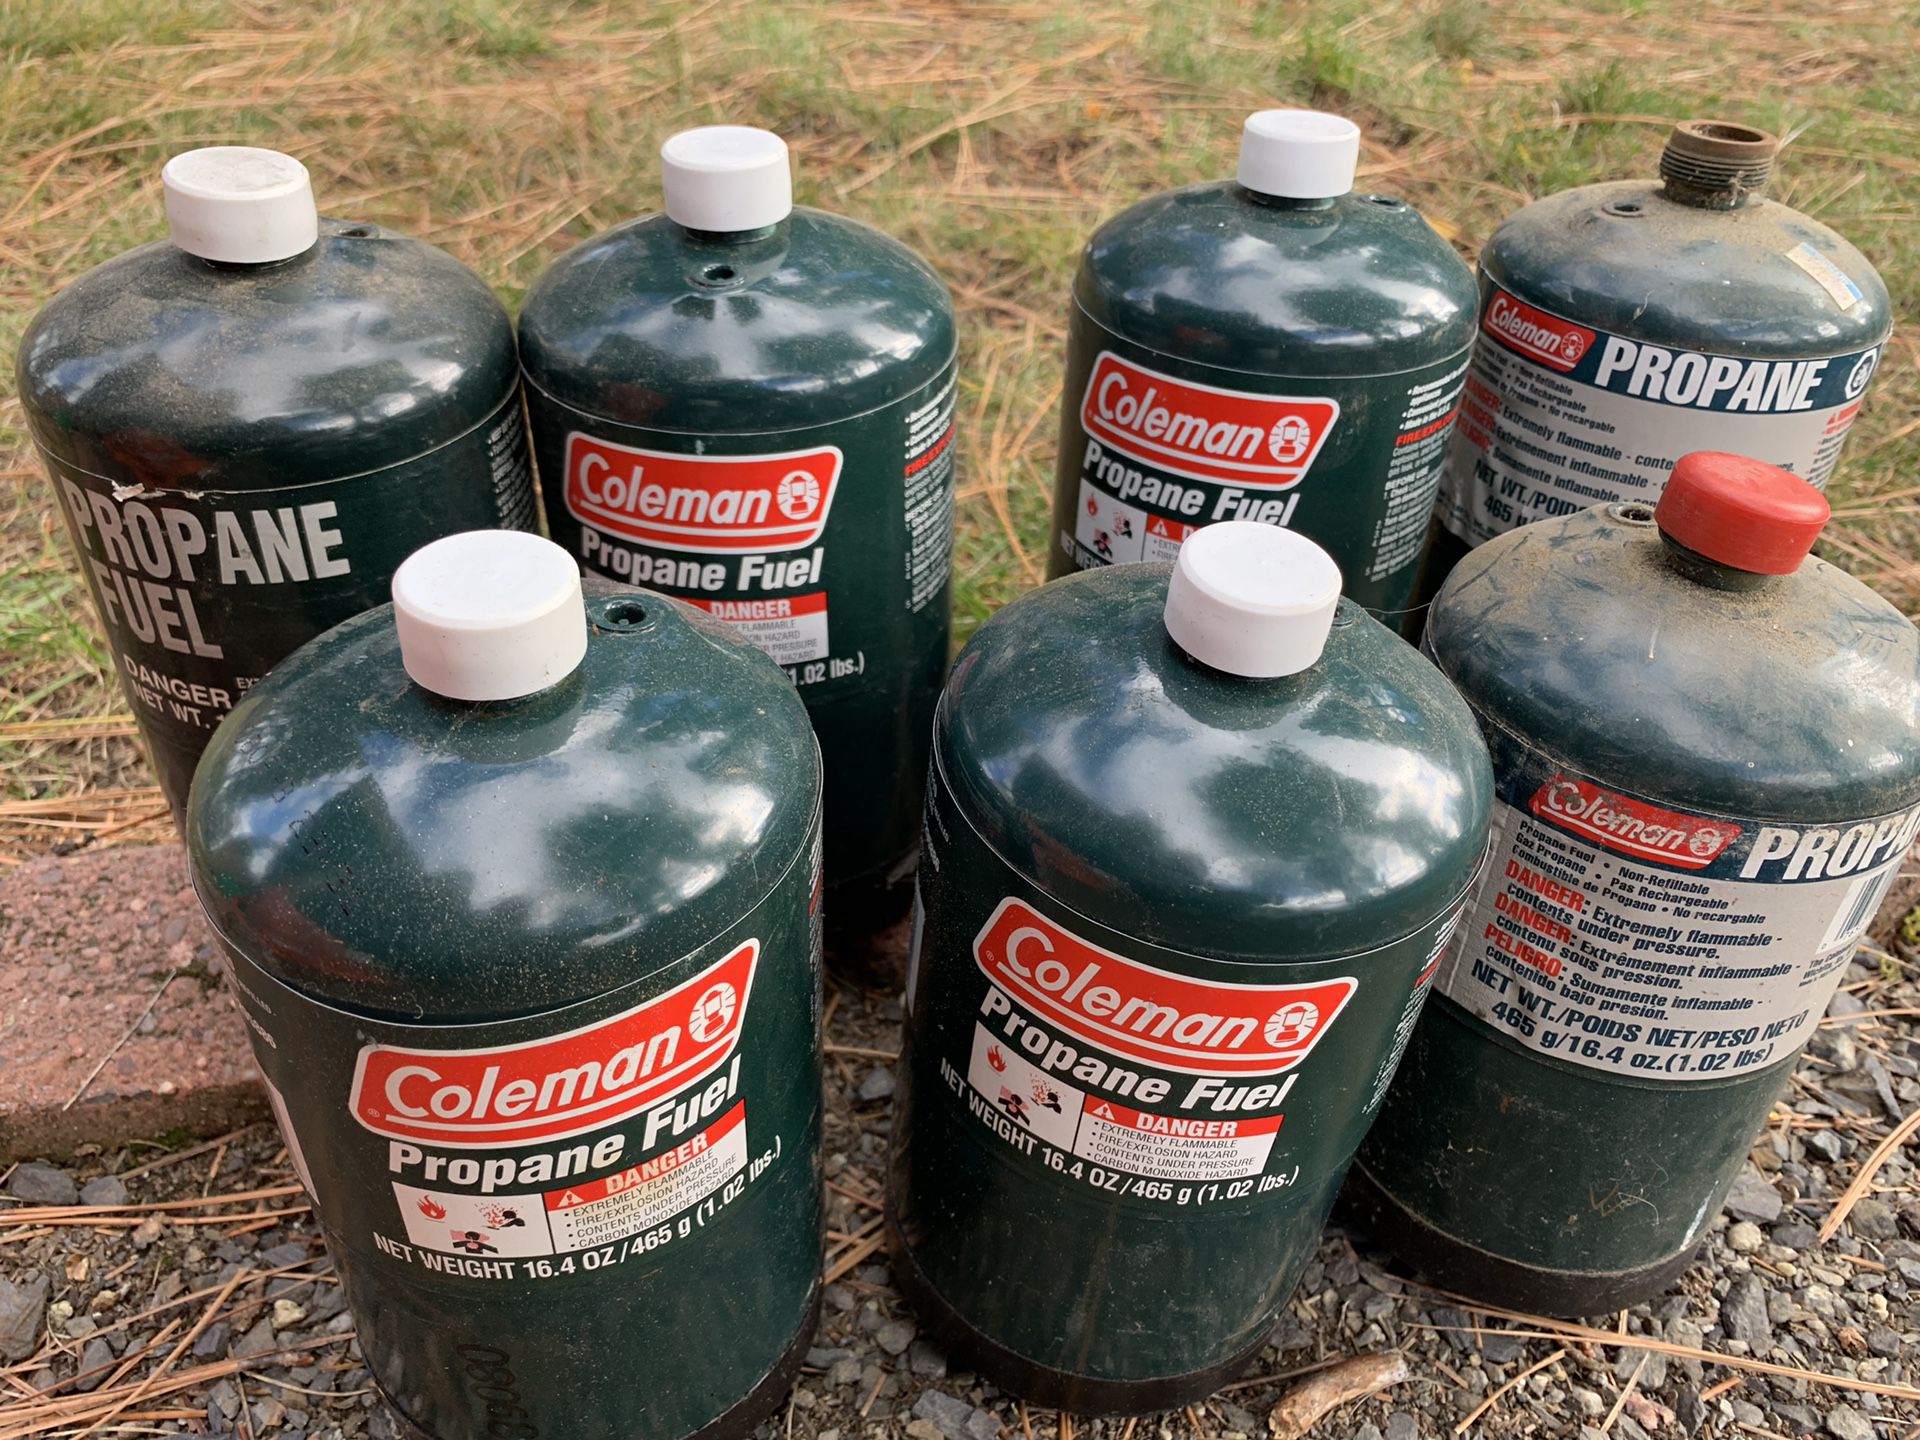 7 Partial cans of propane fuel $10